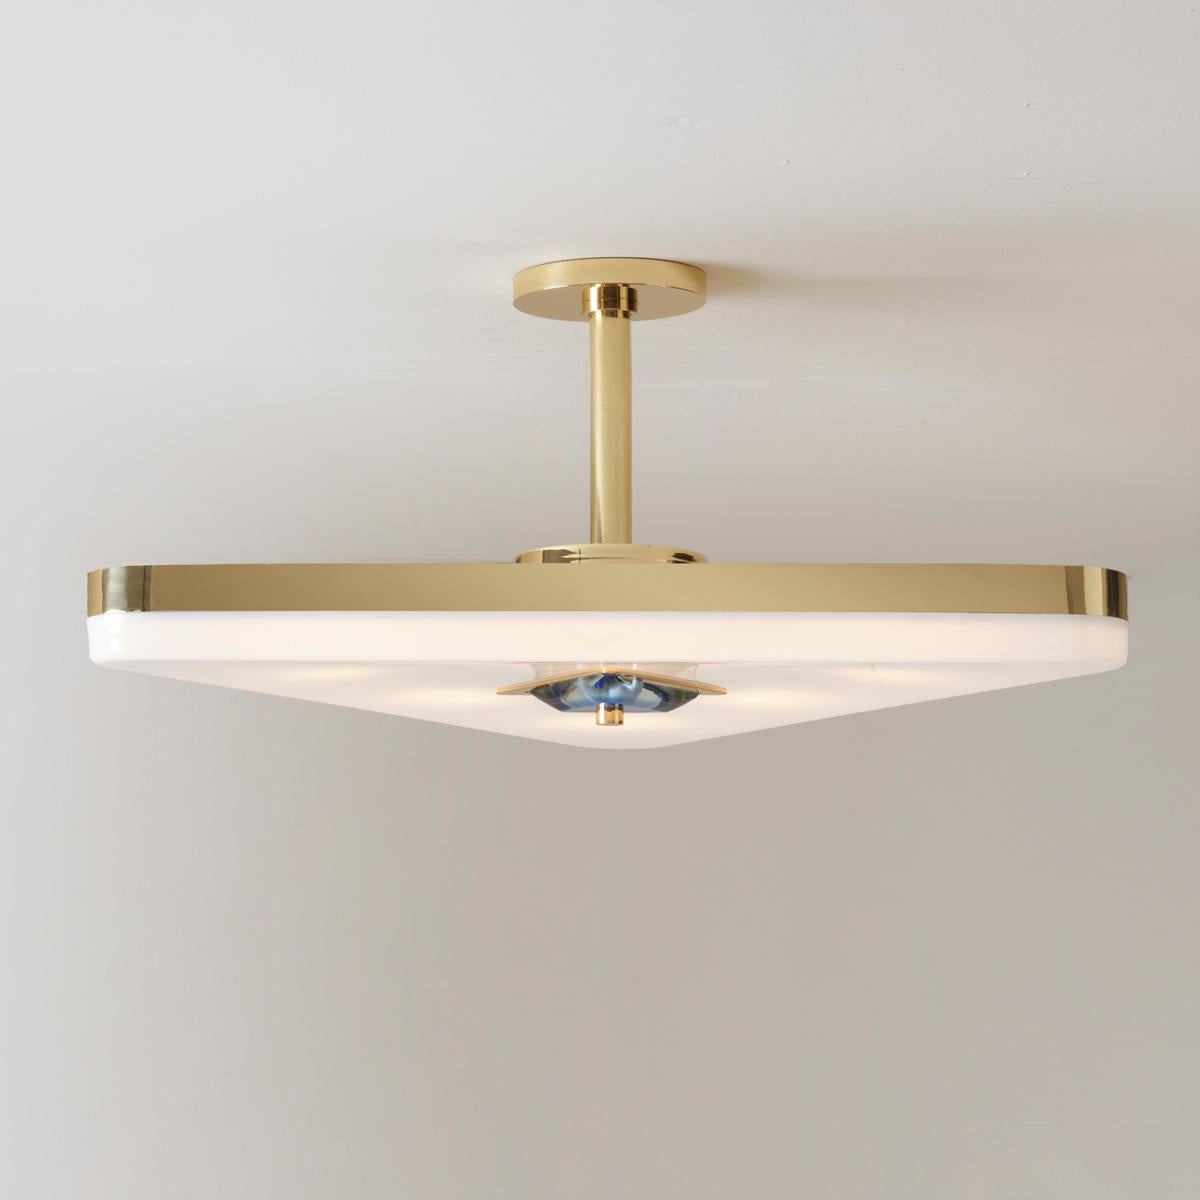 Iris Triangle Ceiling Light by Gaspare Asaro. Polished Nickel Finish In New Condition For Sale In New York, NY